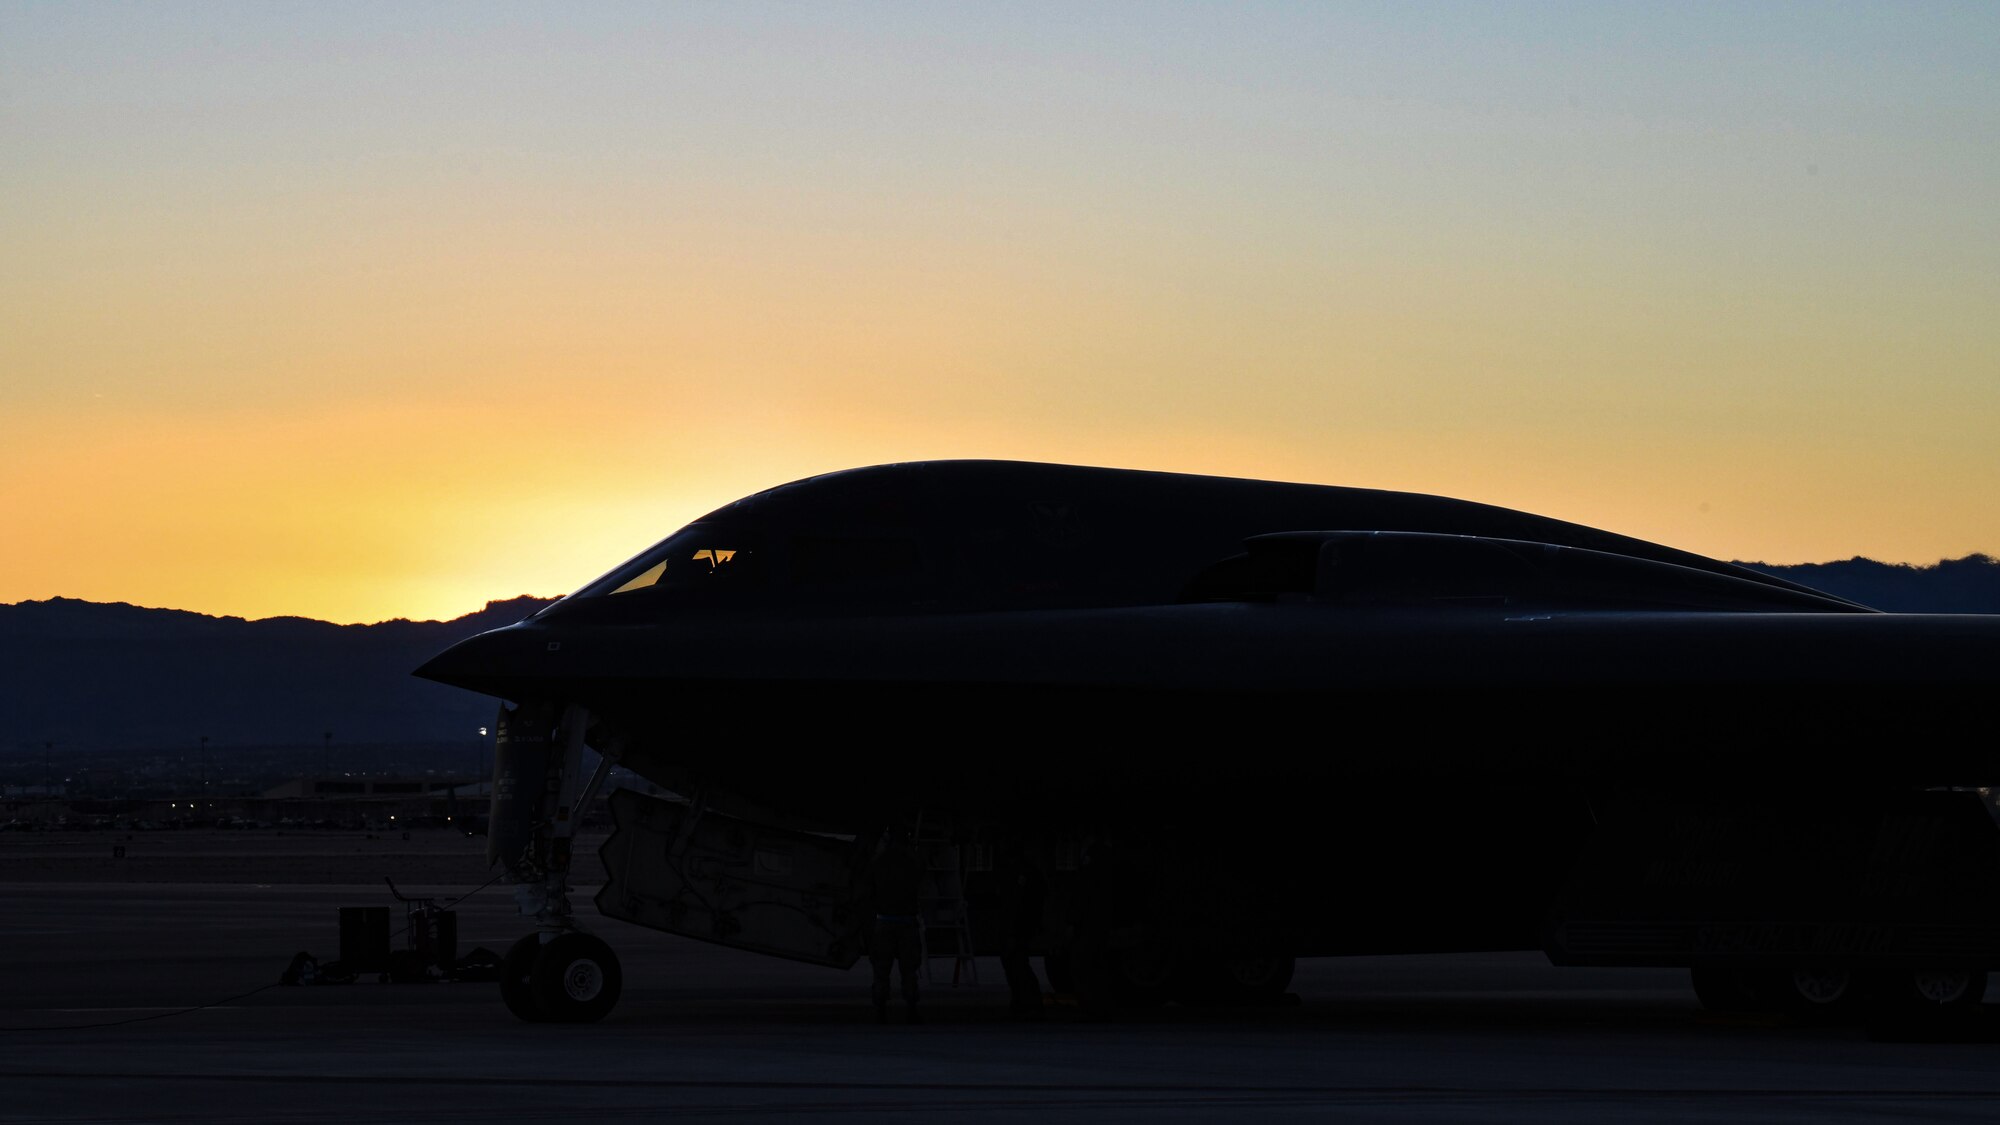 A B-2 Spirit sits on the Nellis Air Force Base flightline at sunset.